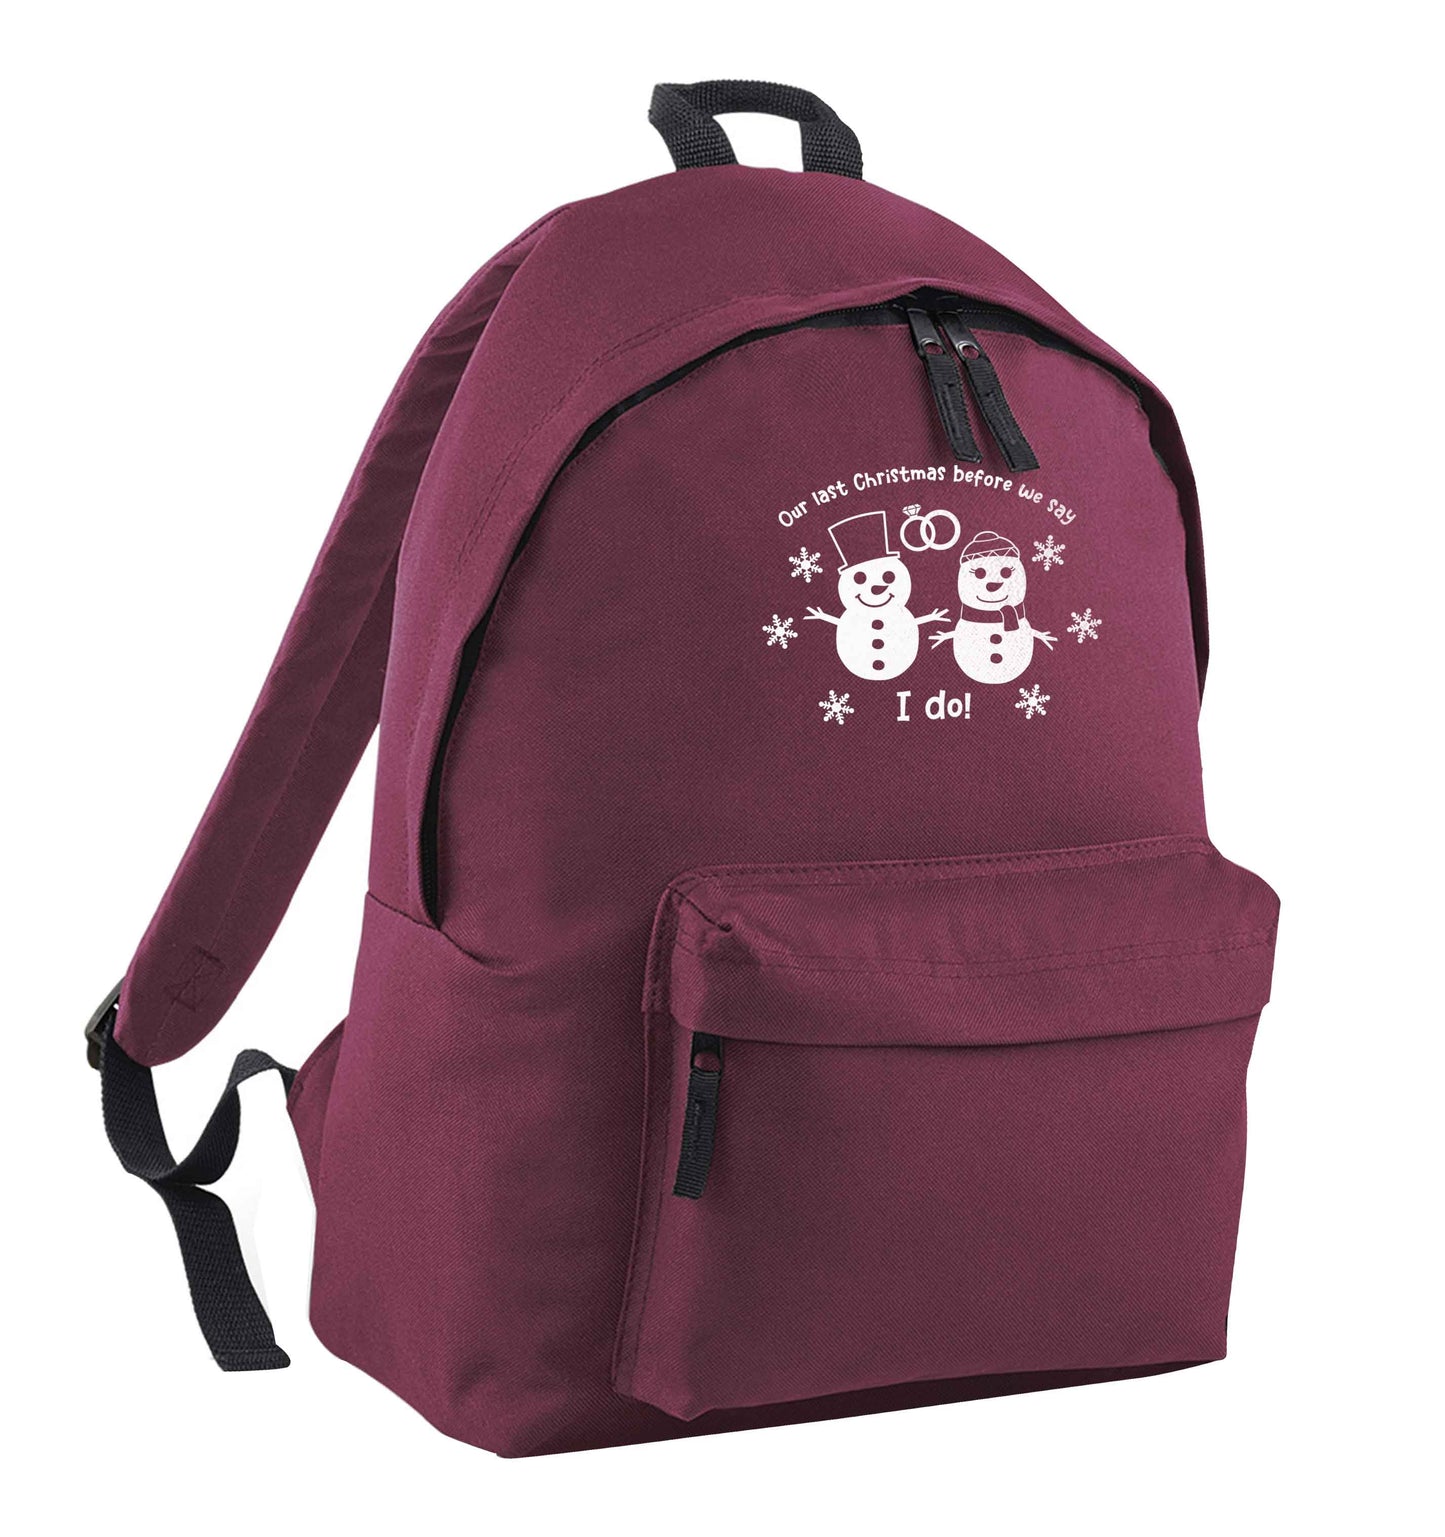 Last Christmas before we say I do maroon adults backpack